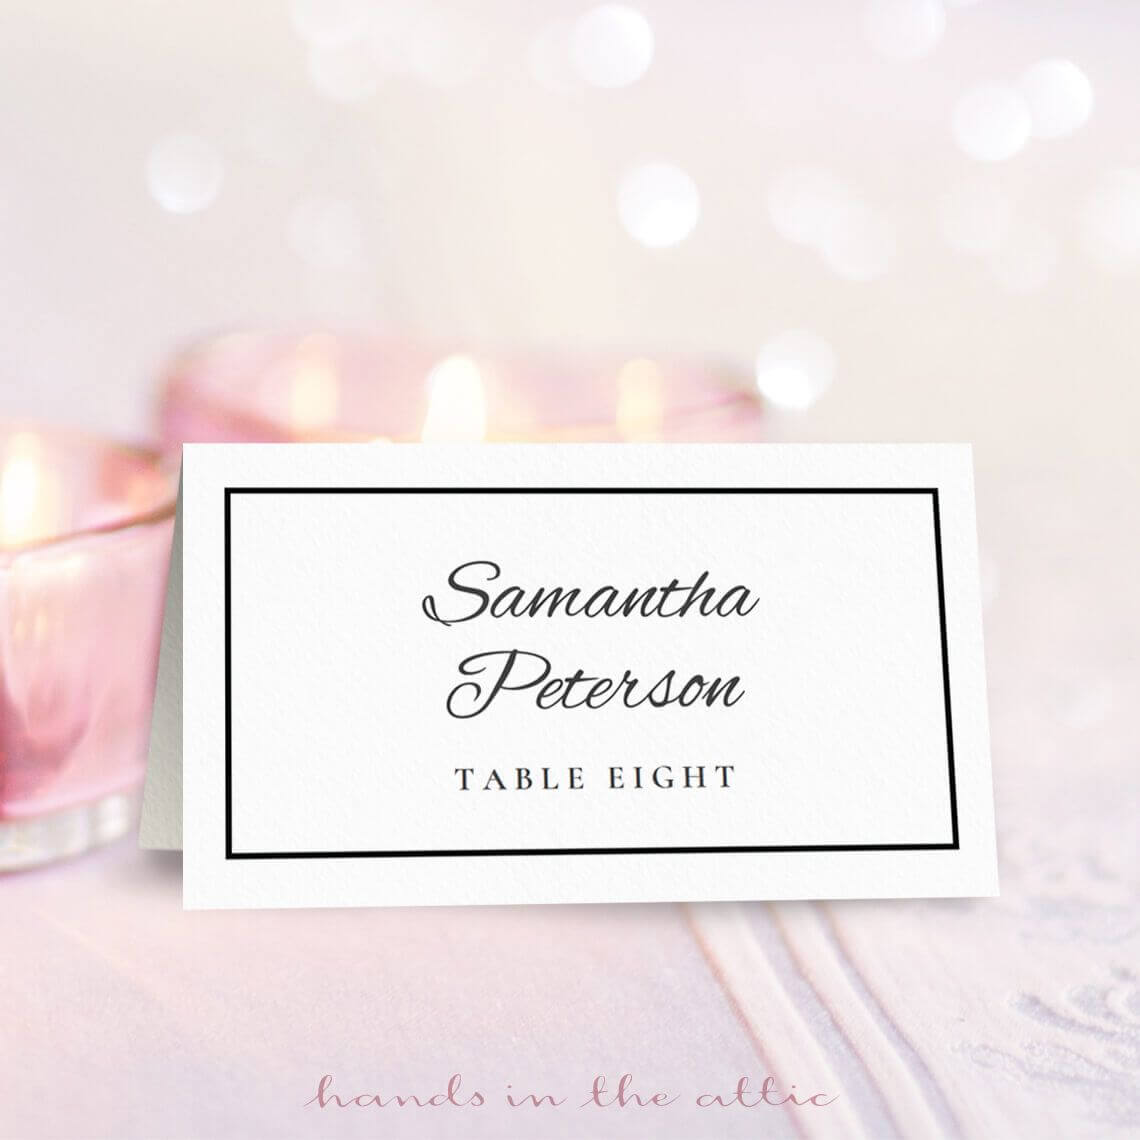 Wedding Place Card Template | Free Place Card Template Inside Table Name Card Template